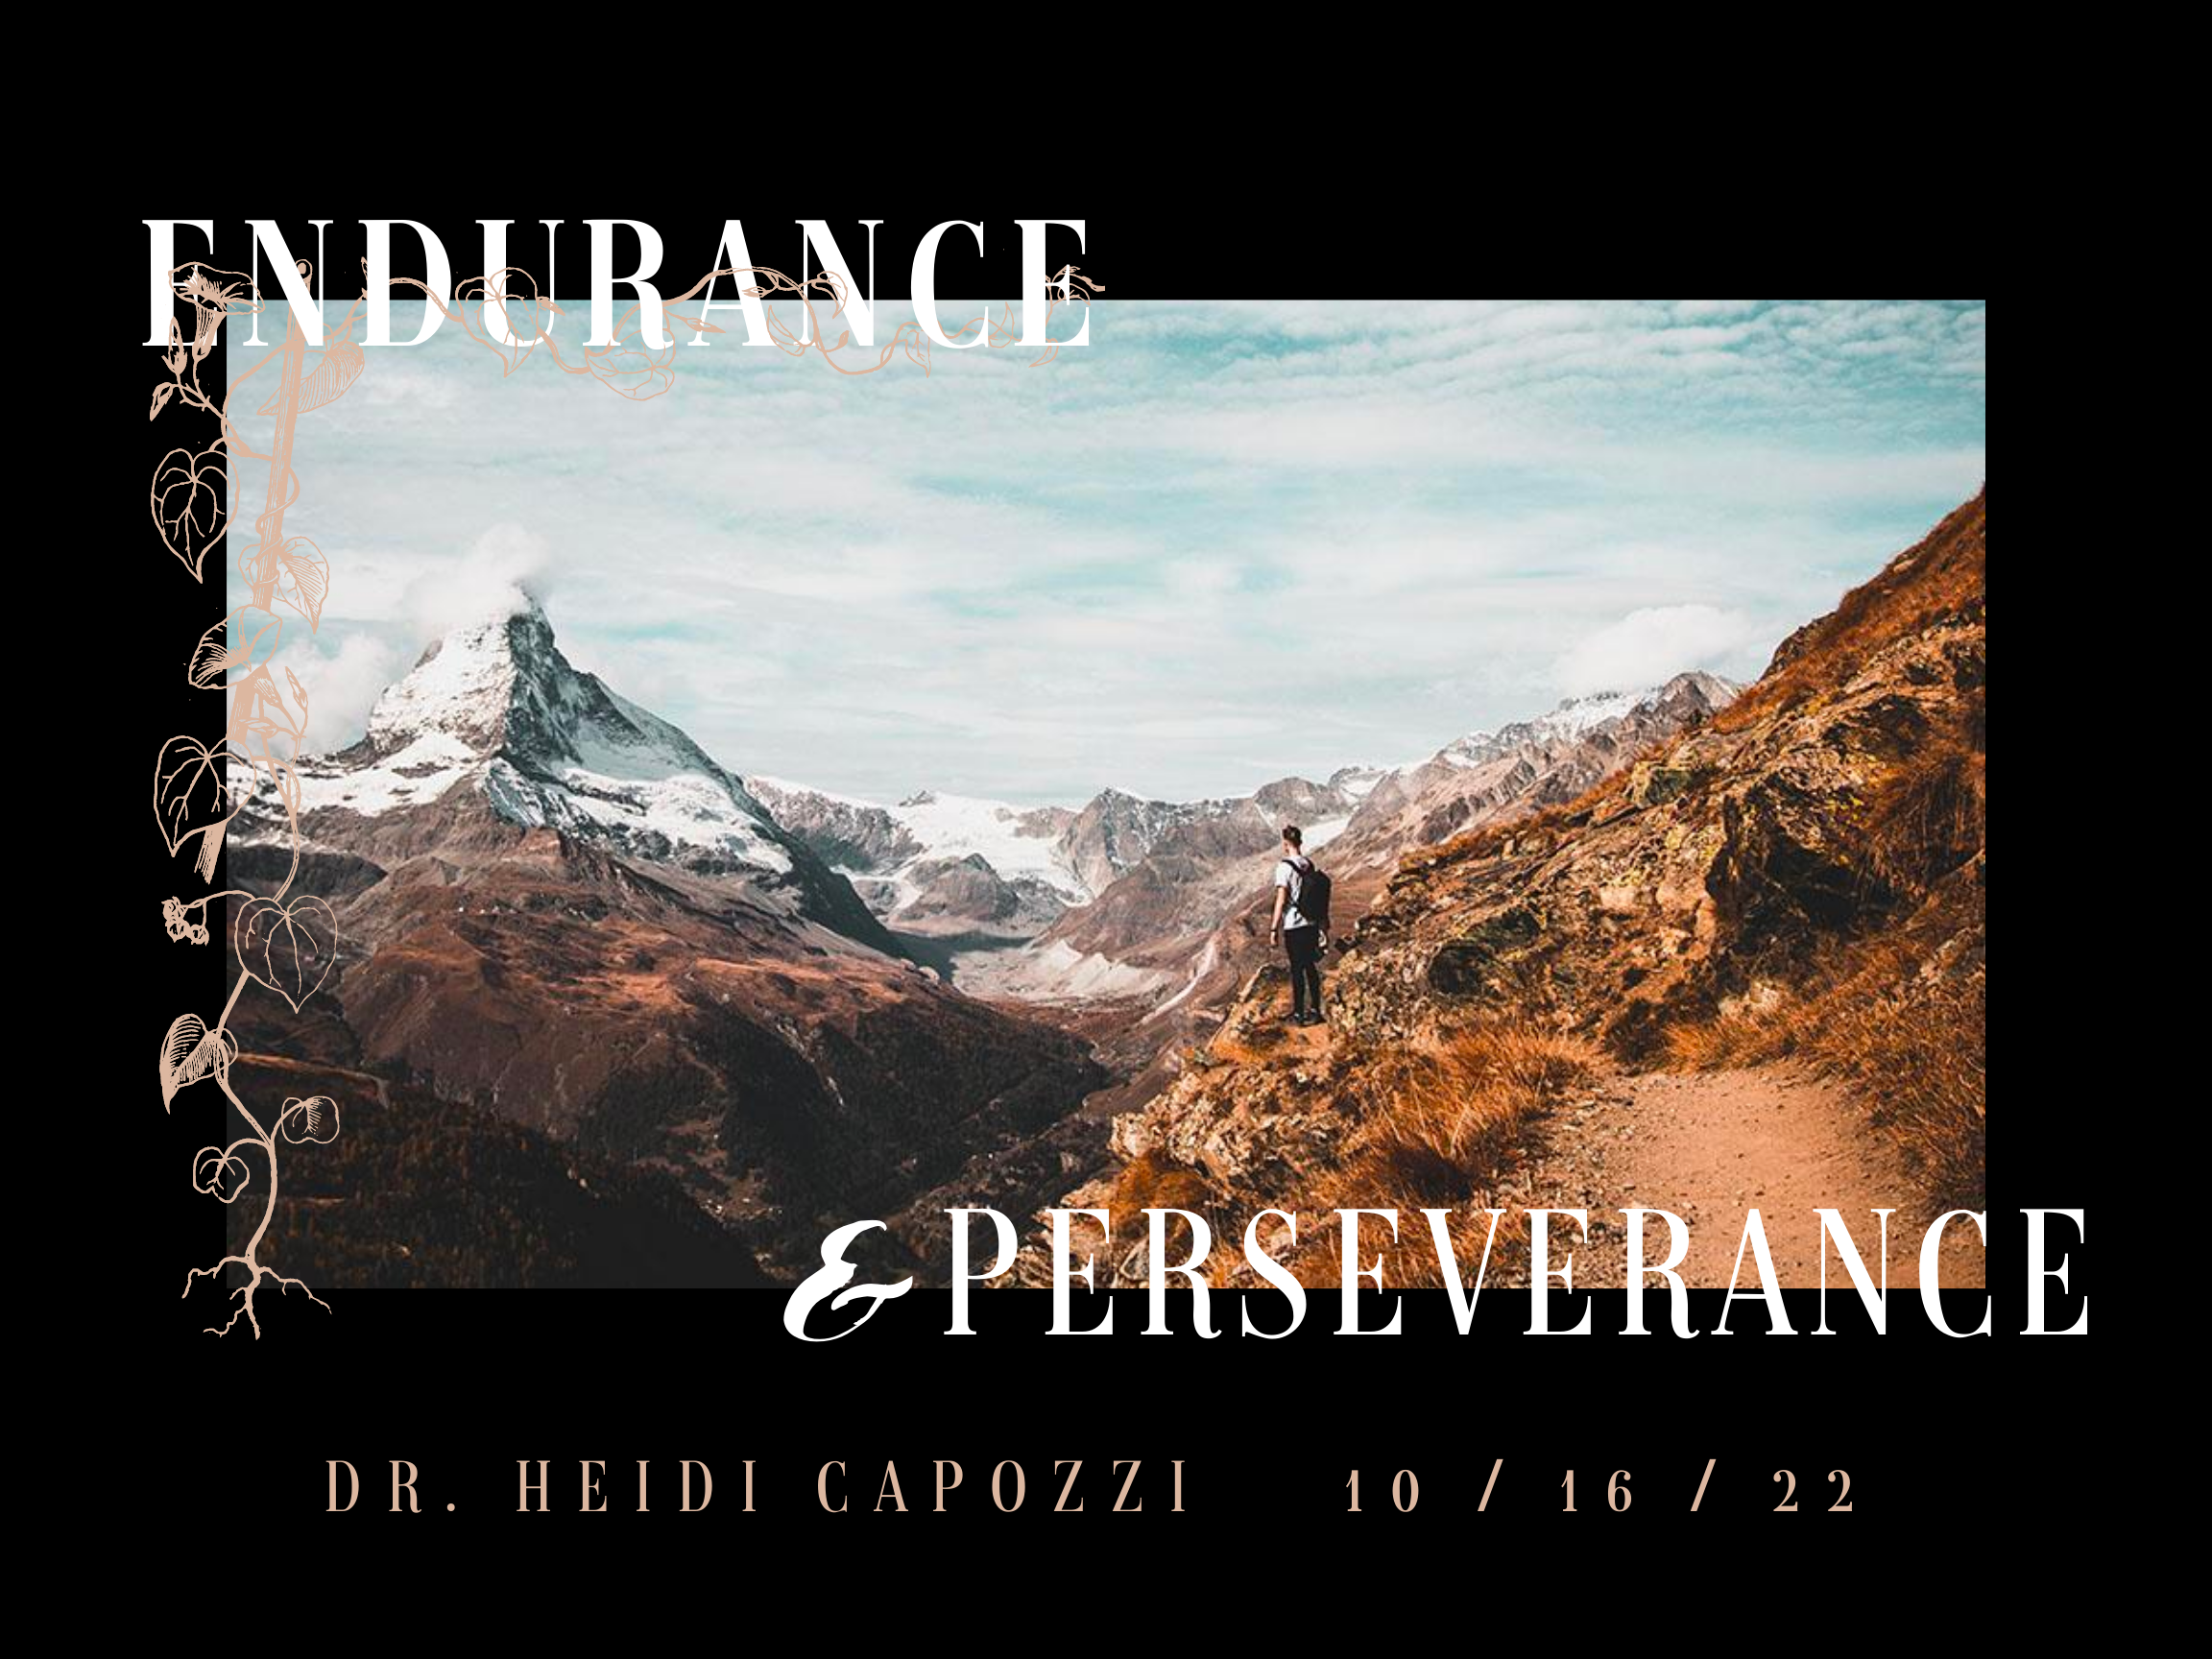 Endurance and Perseverance